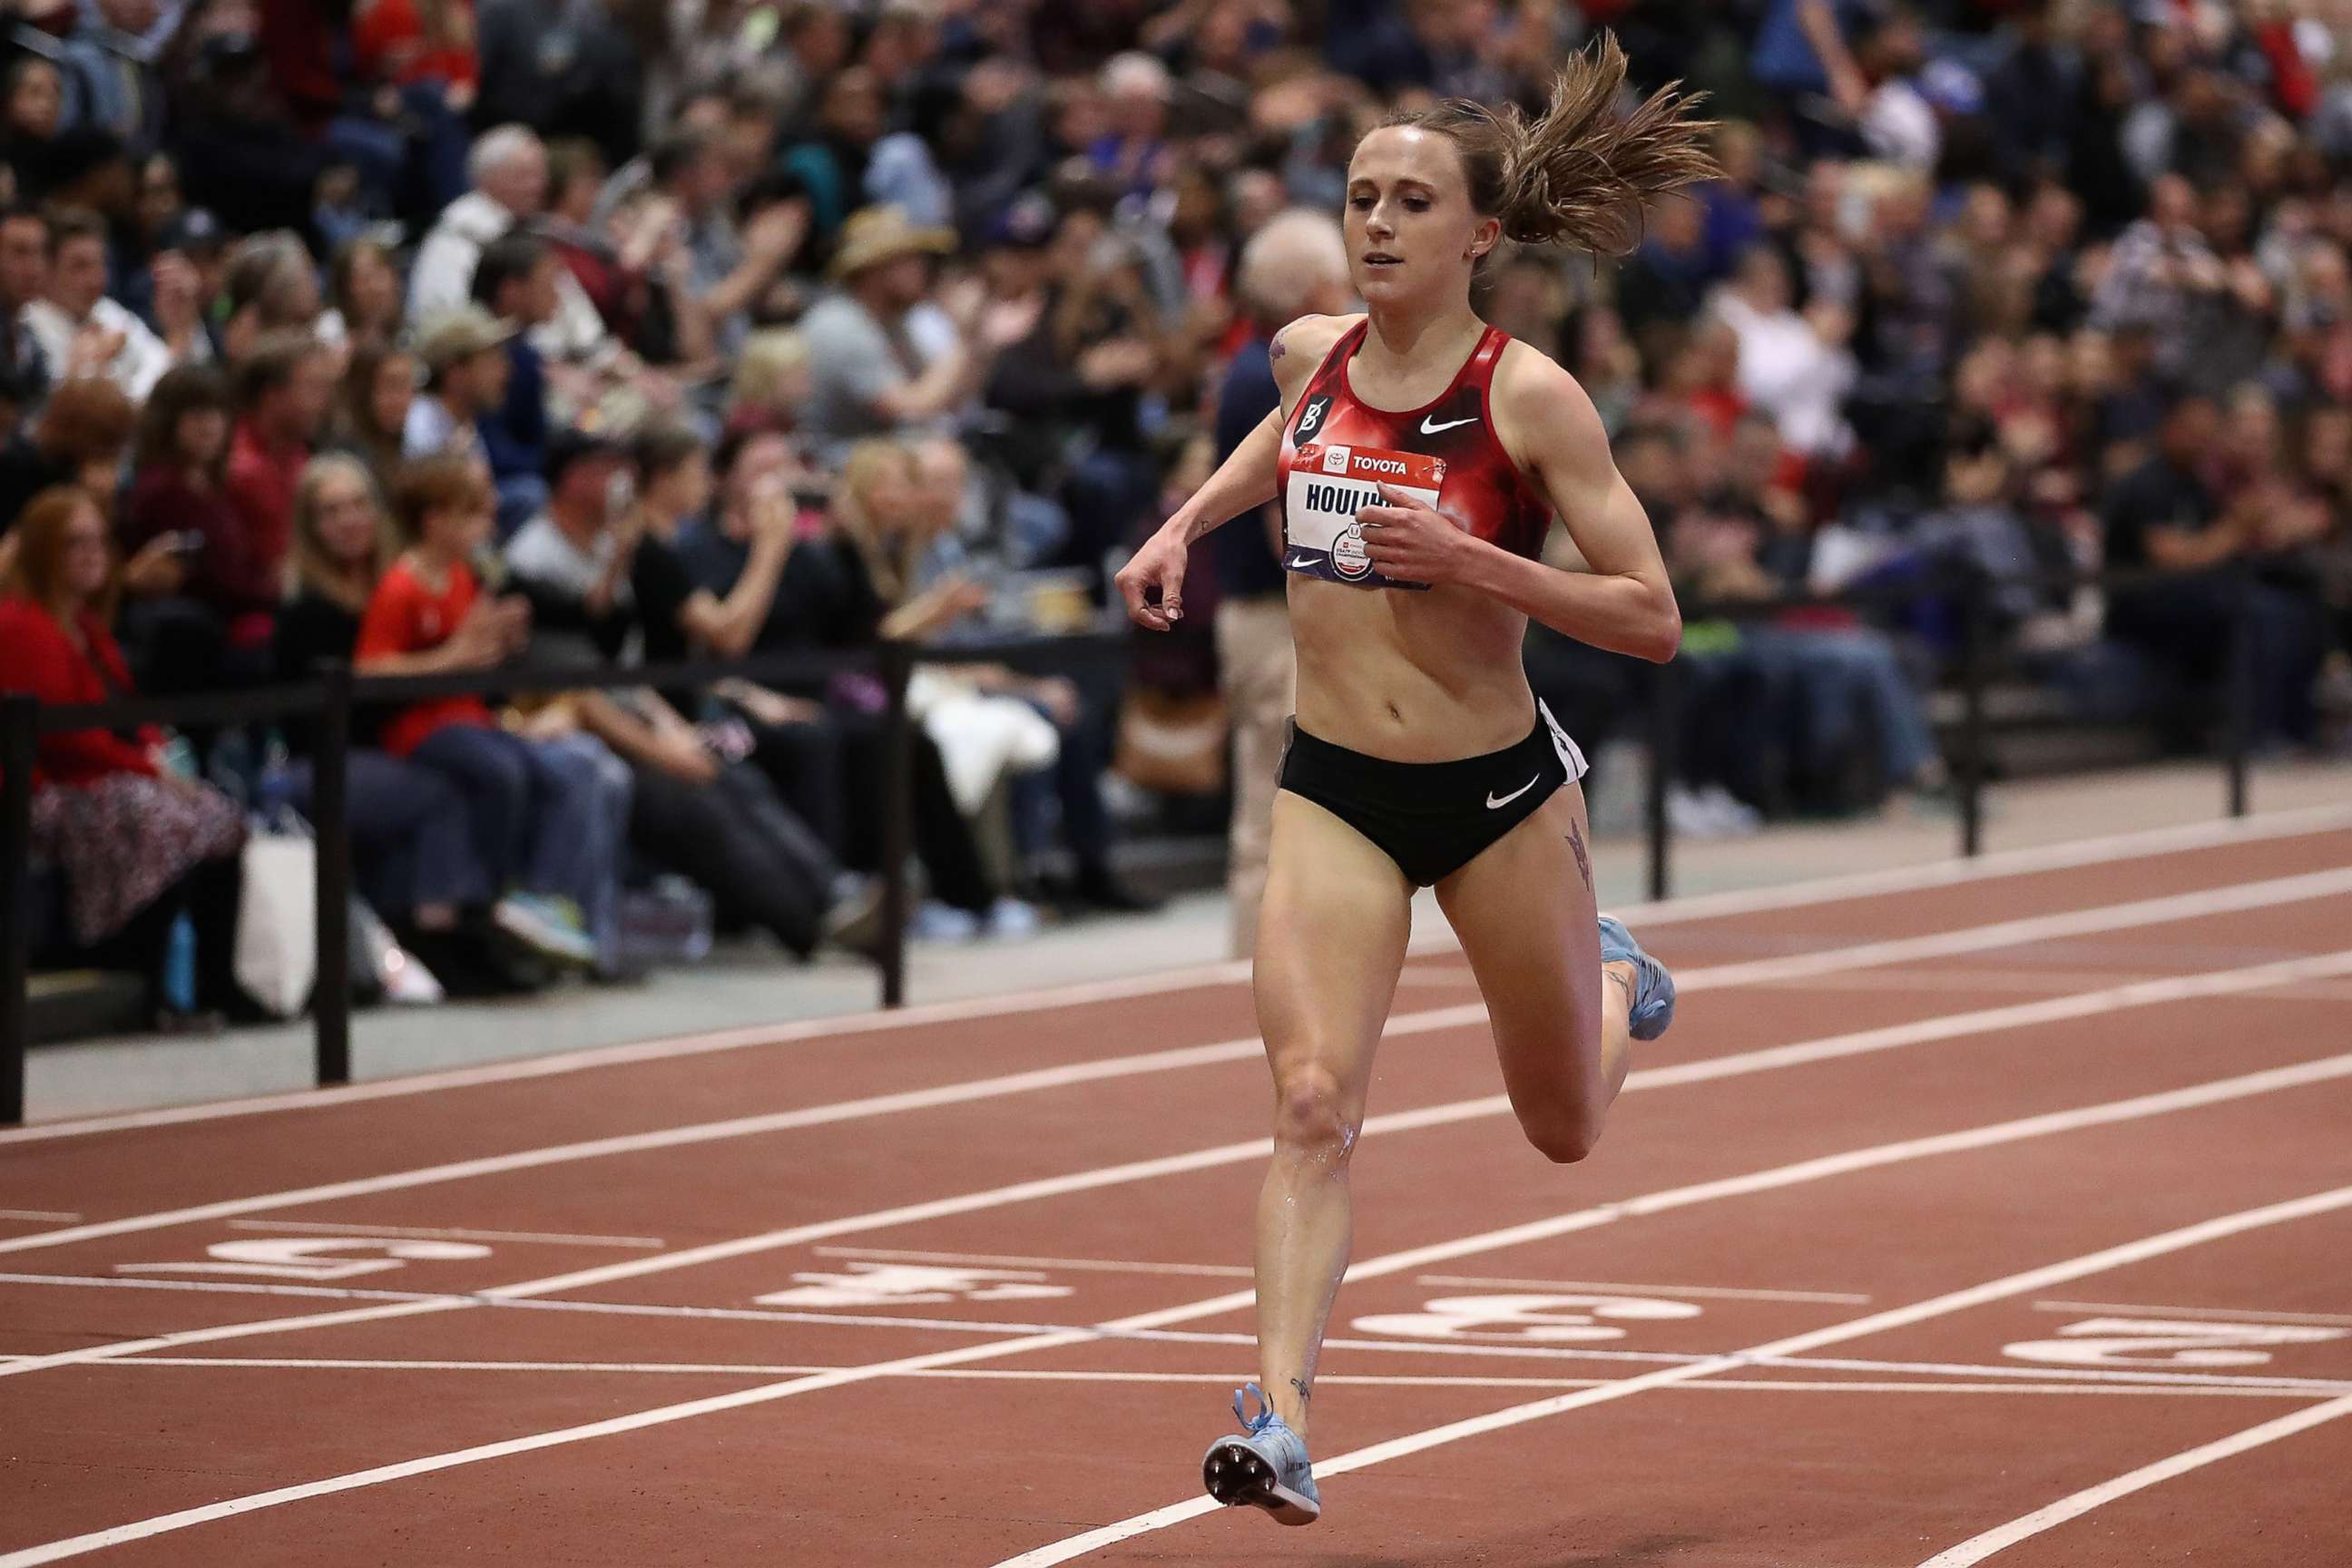 PHOTO: In this Feb. 14, 2020 Shelby Houlihan crosses the finish line to win the Women's 3000 M during the 2020 Toyota USATF Indoor Championships at Albuquerque Convention Center on Feb. 14, 2020 in Albuquerque, New Mexico.